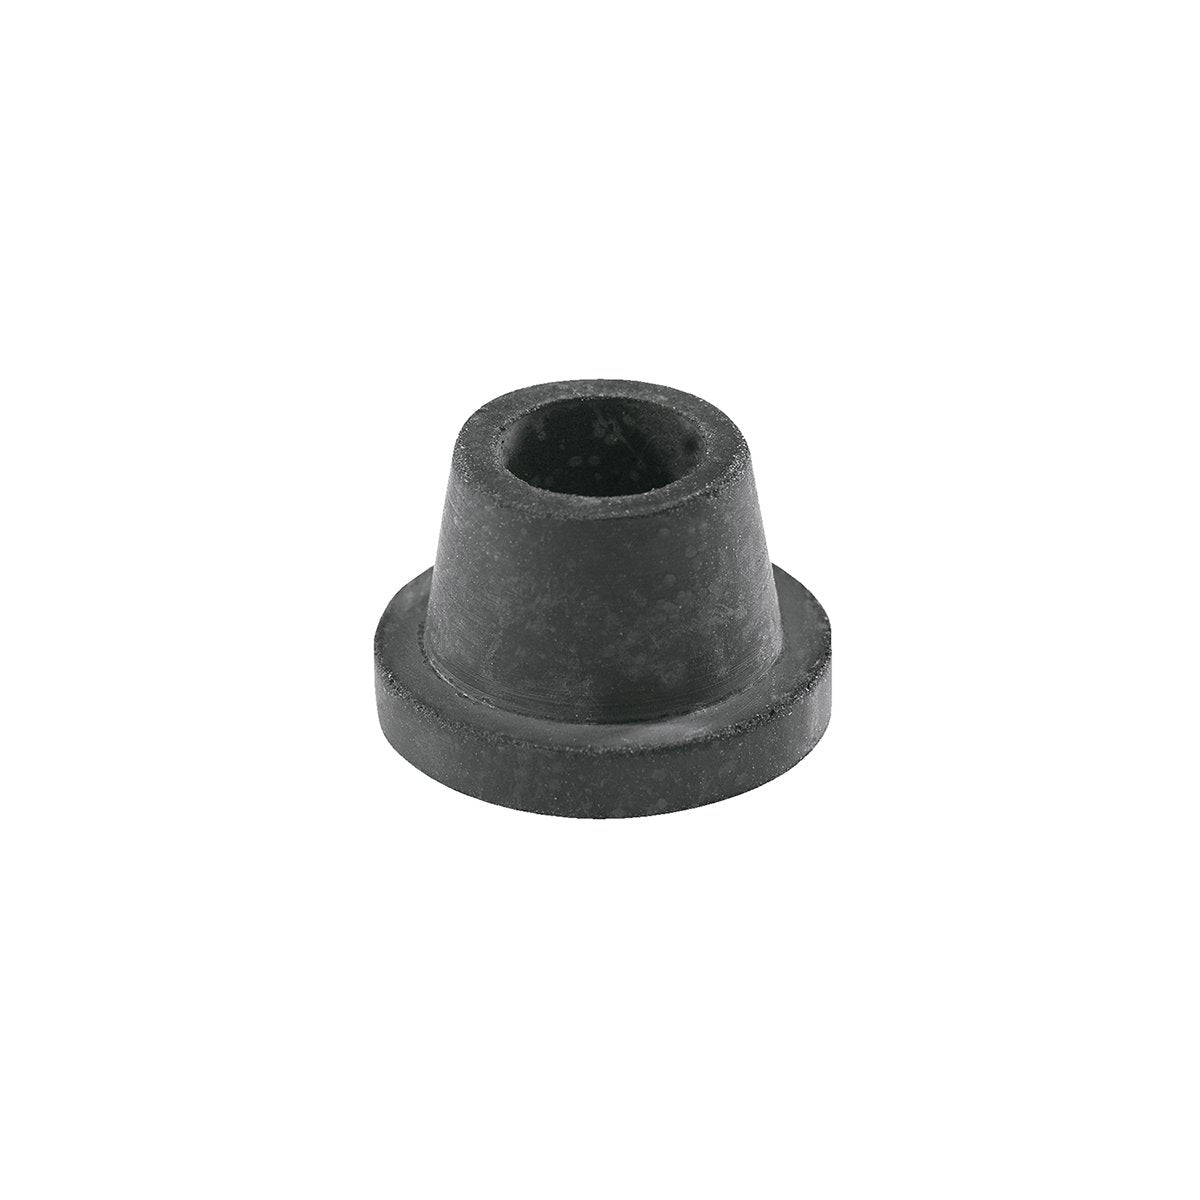 SKS - Pump Parts - Presta Rubber Washer Replacement for #2371